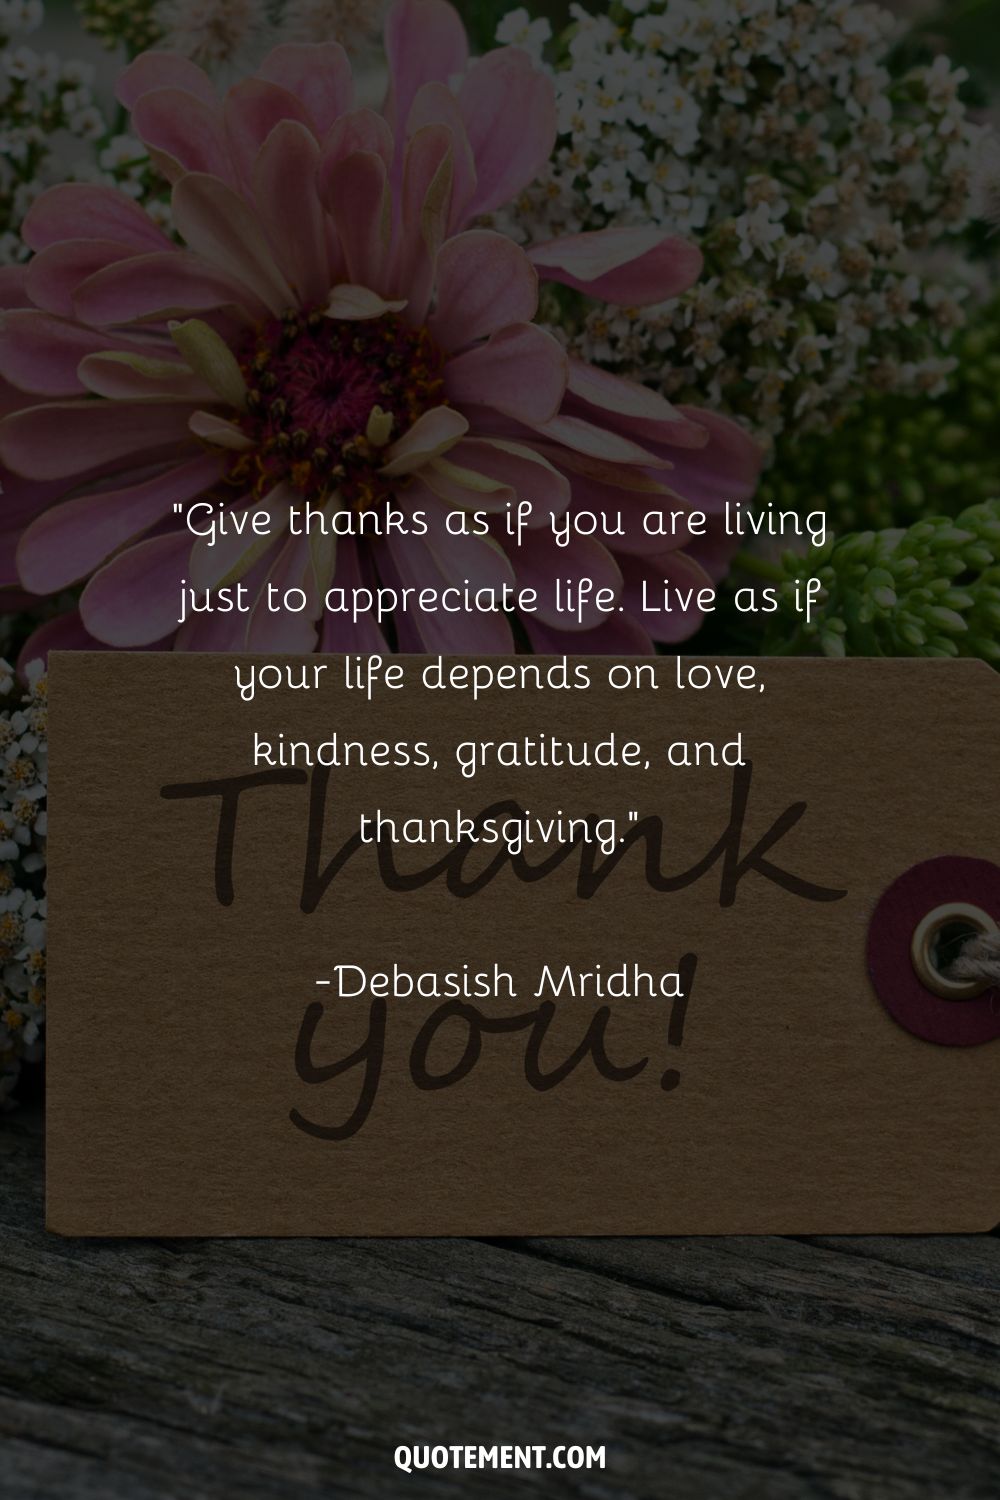 Give thanks as if you are living just to appreciate life.